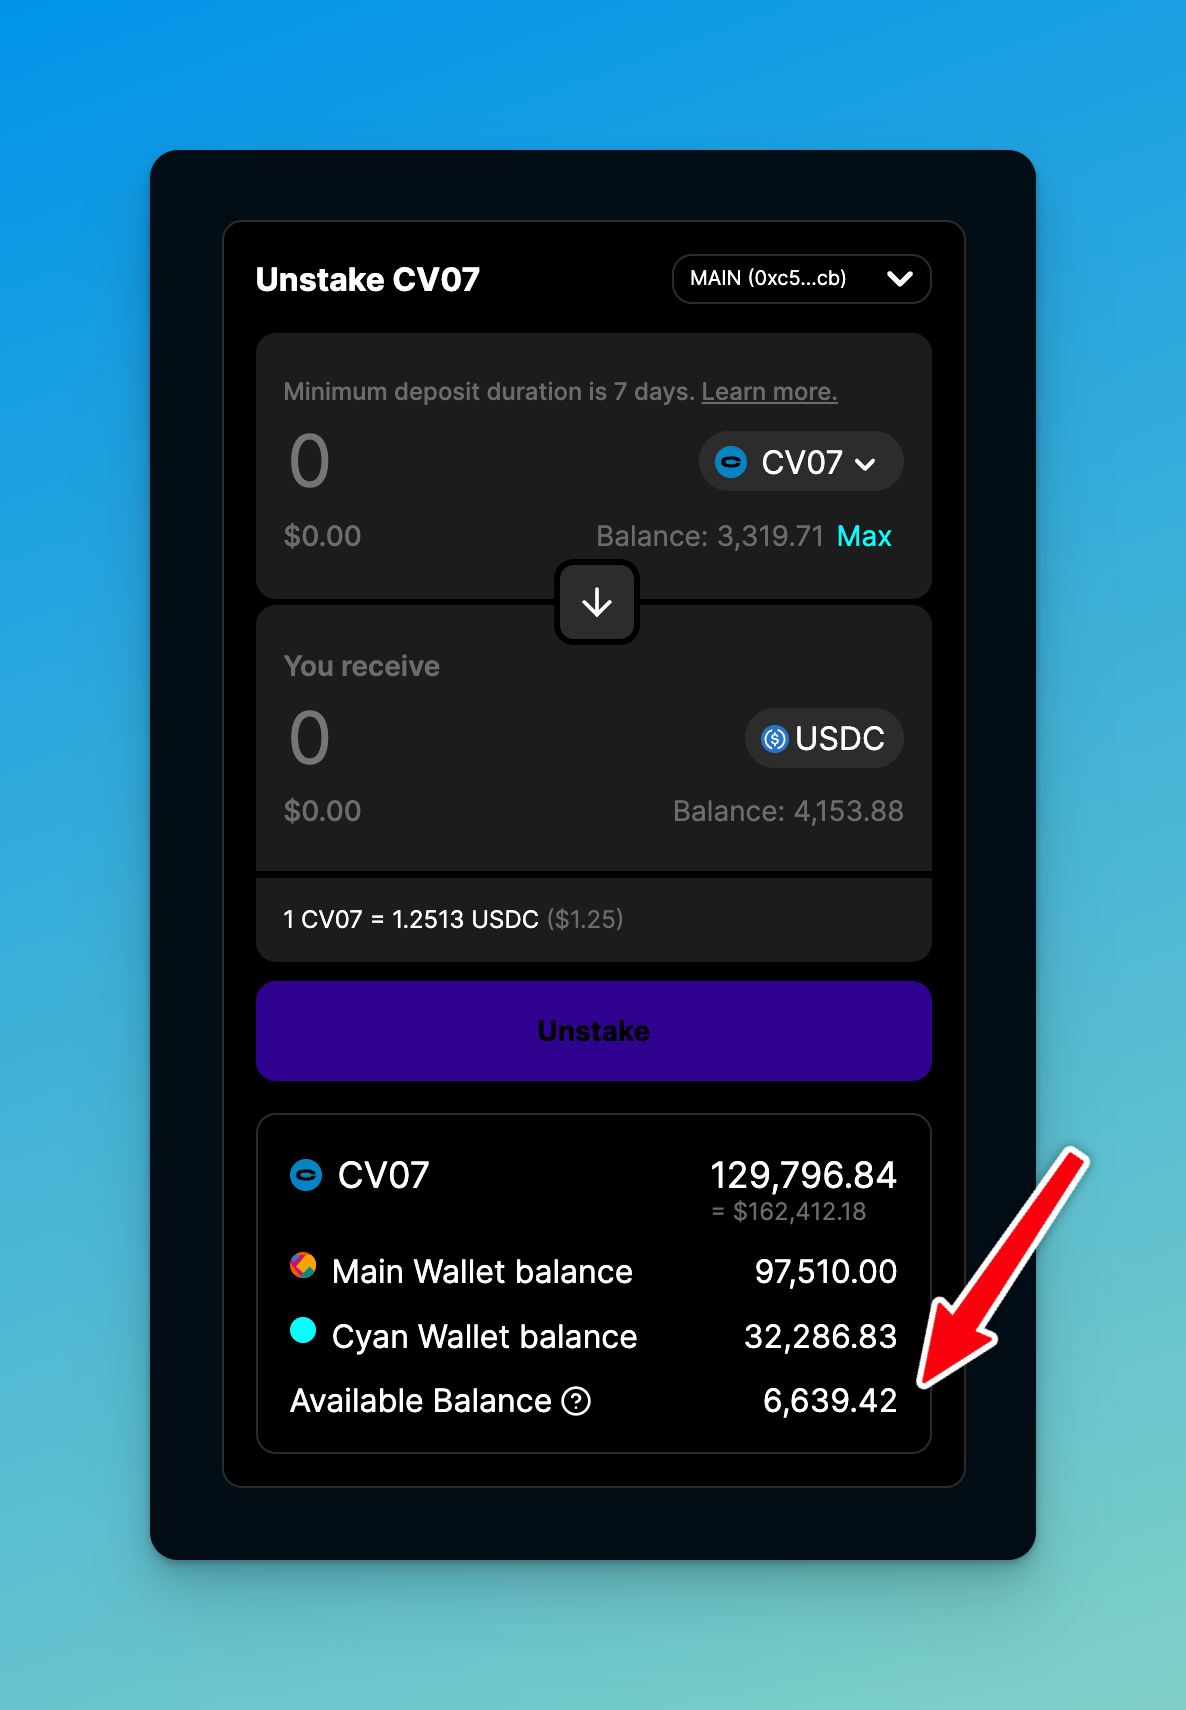 The Available Balance shown is a total between the Main and Cyan wallets